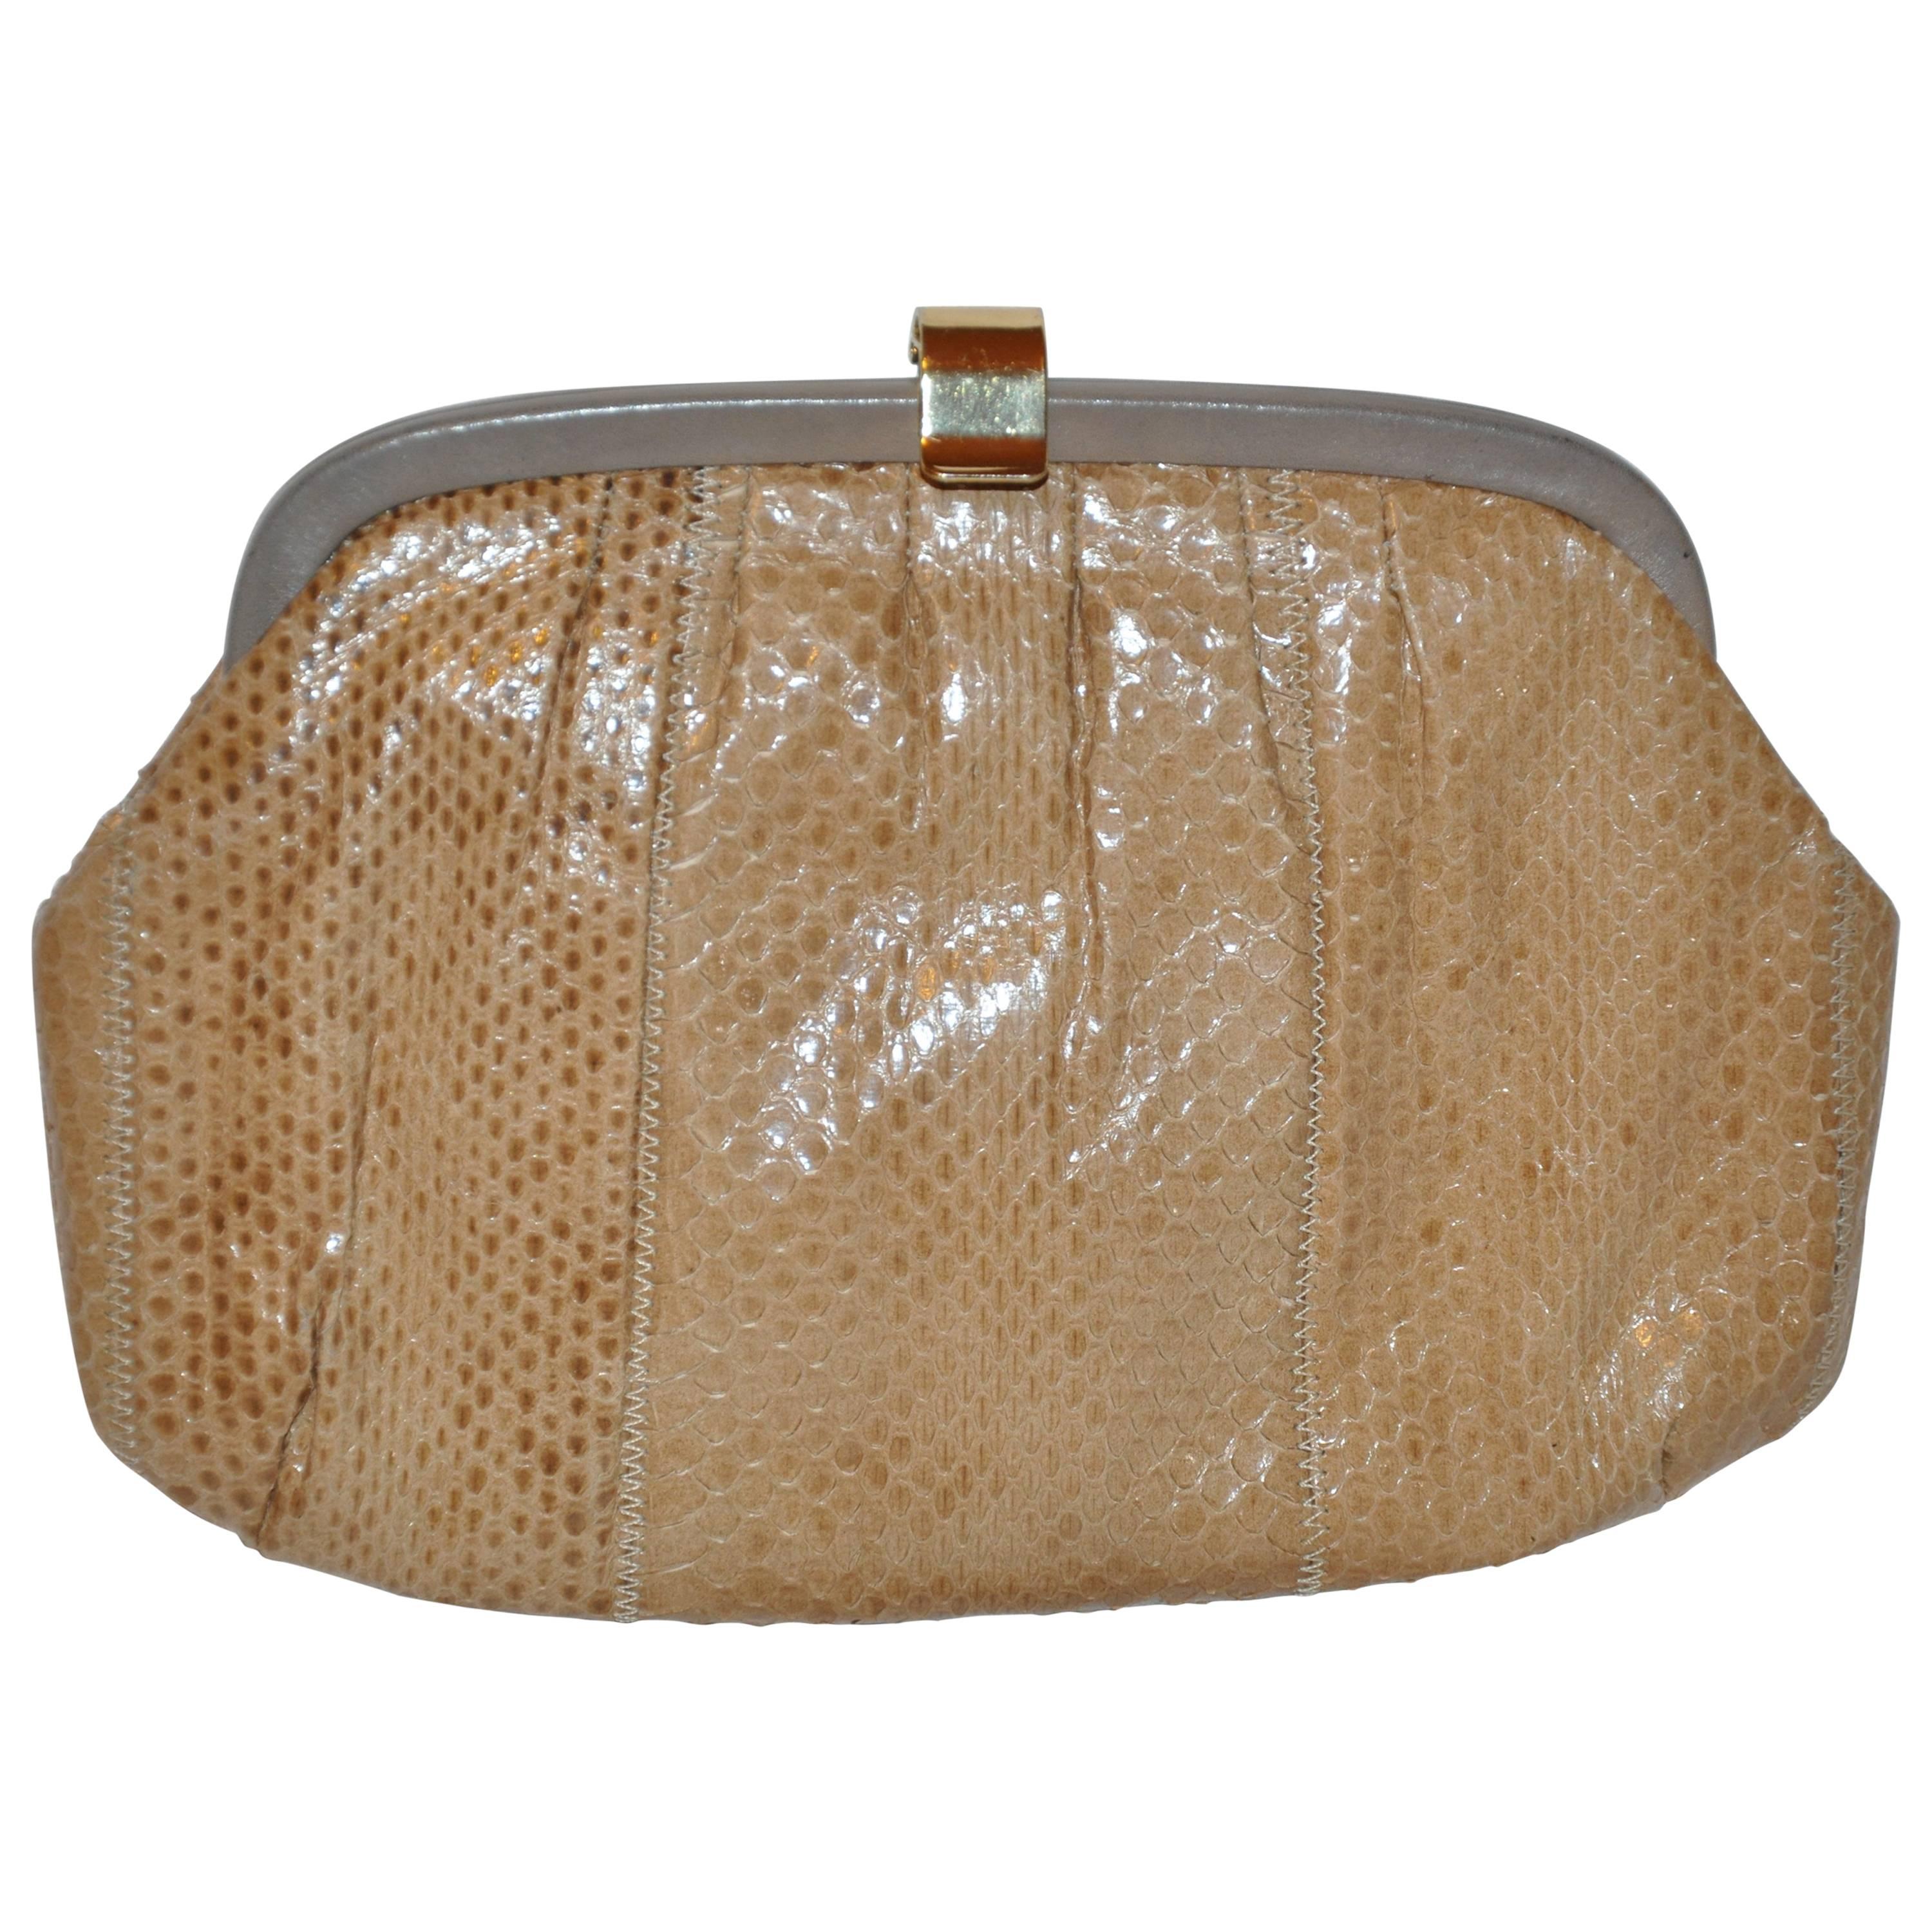 Palizzio of Italy Tan Snake with Gray Calfskin Accent Clutch